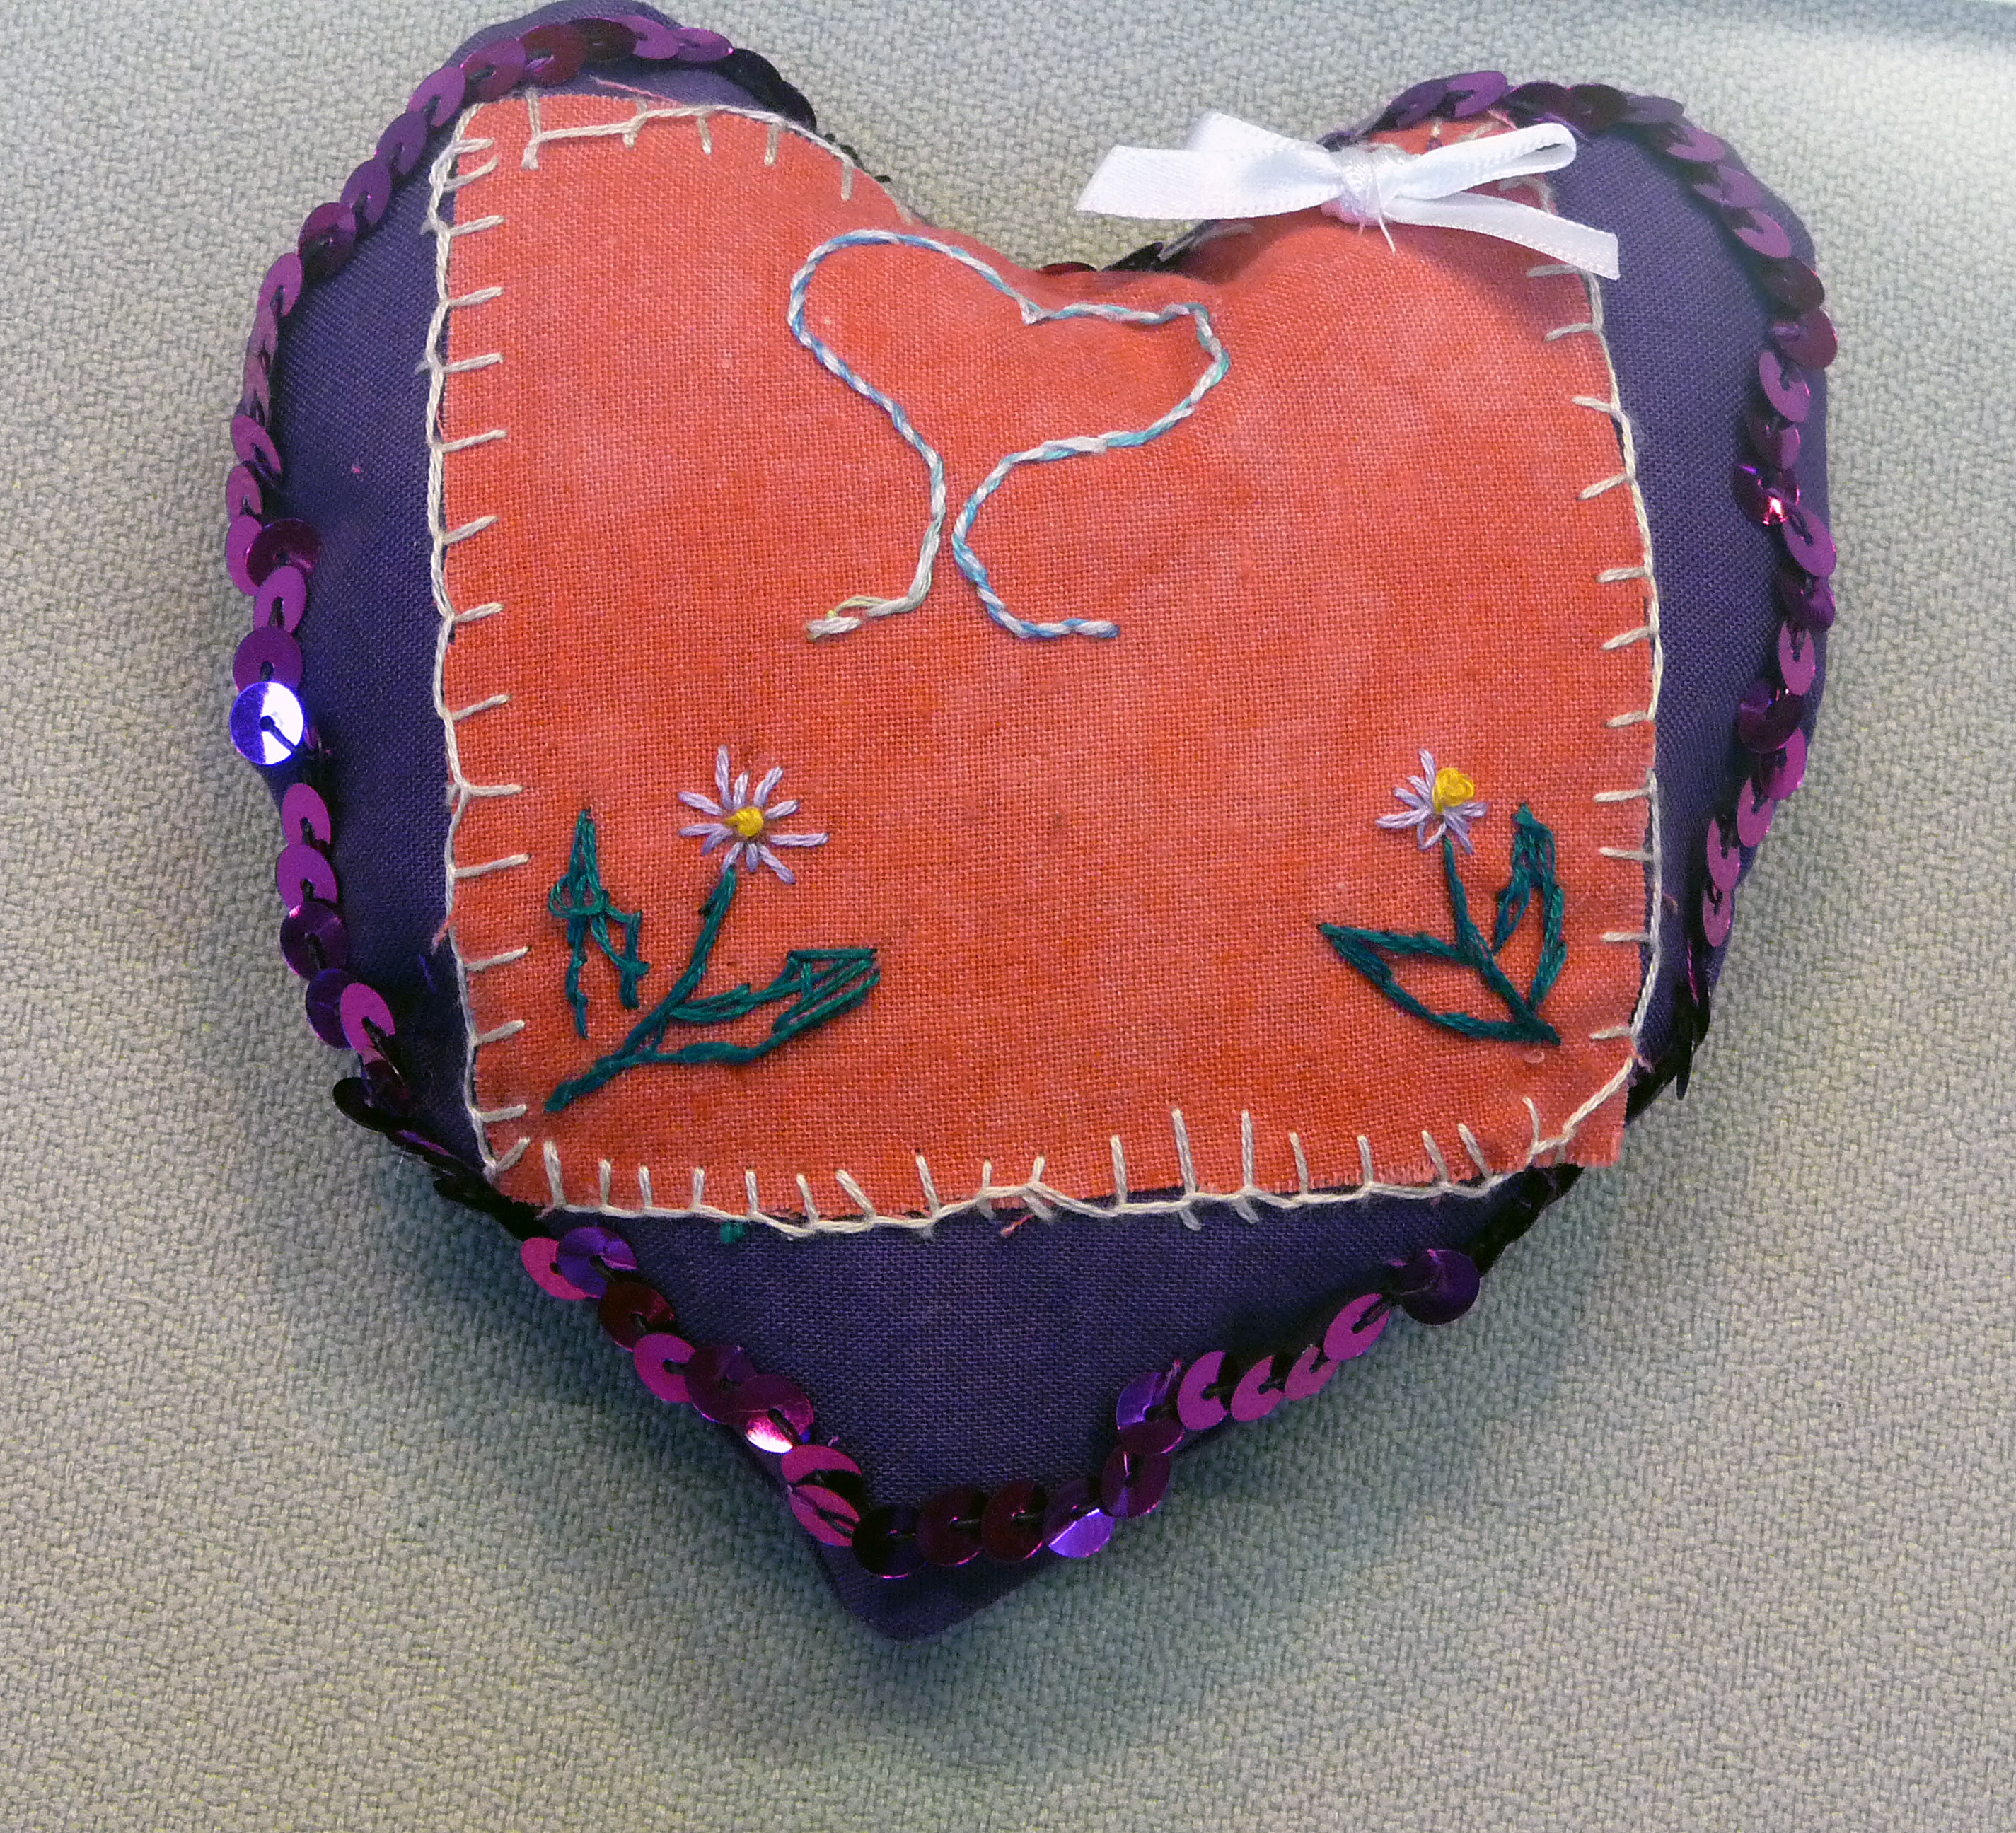 pincushion to commemorate World War 1 made by Chloe, a Merseyside Young Embroiderer